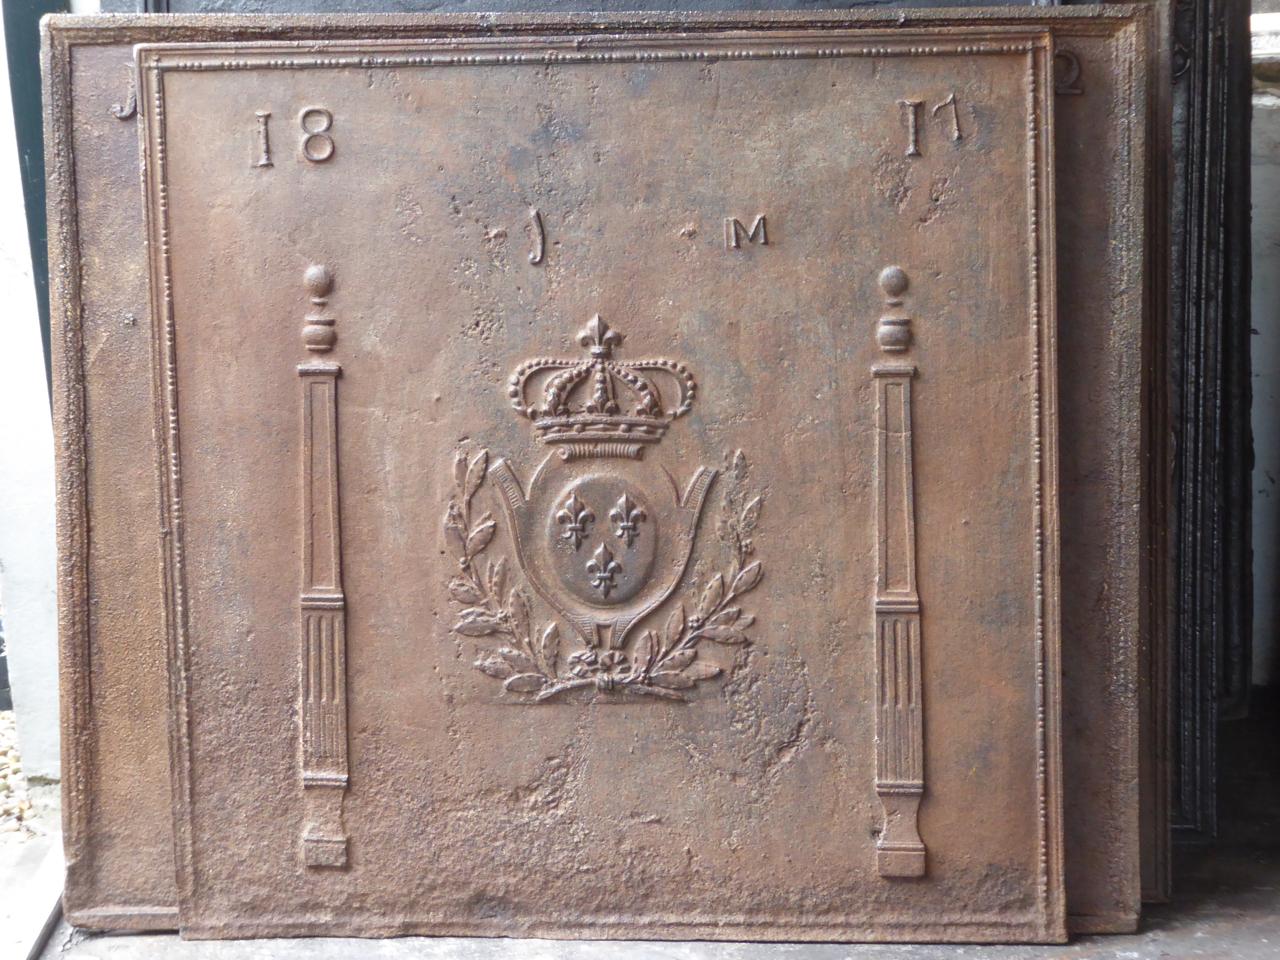 19th century French neoclassical fireback with two pillars of freedom and the arms of France. The date of production 1811 is also cast in the fireback. The pillars of freedom stand for one of the three values of the French Revolution. Whereas the